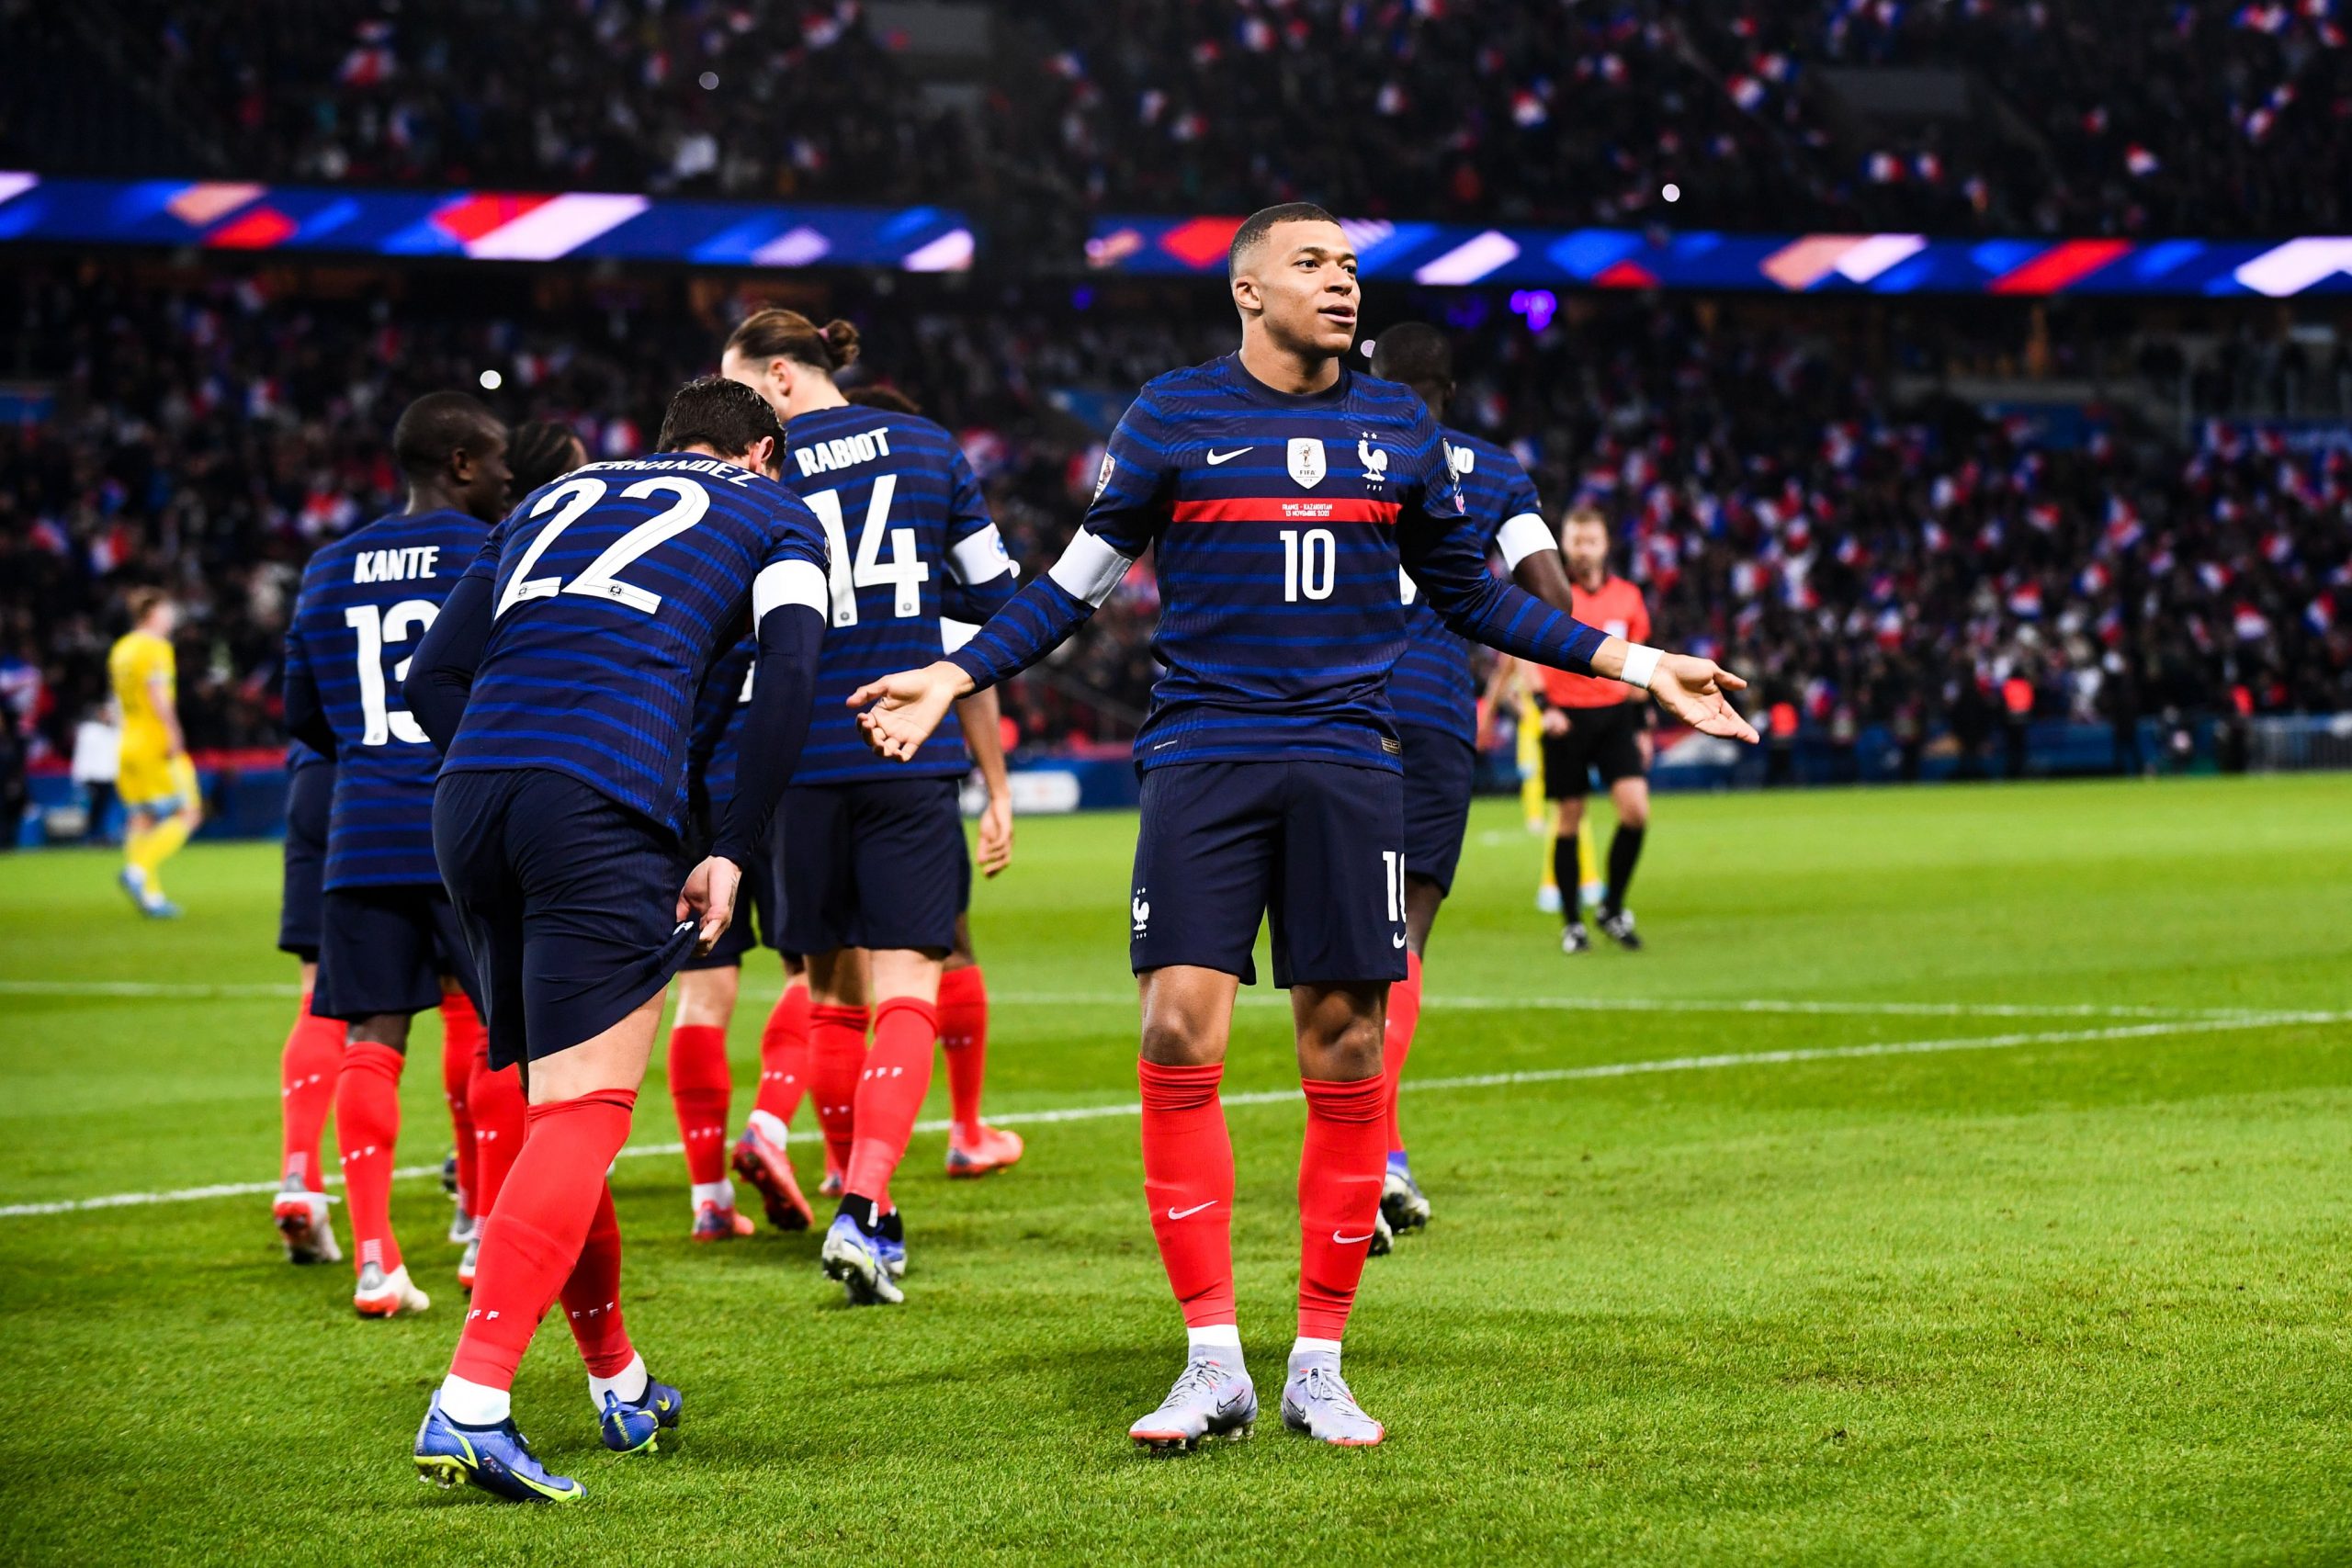 France 8 0 Kazakhstan; Stunning Kylian Mbappé Performance Helps Les Bleus To Seal Qualification For Qatar 2022 World Cup